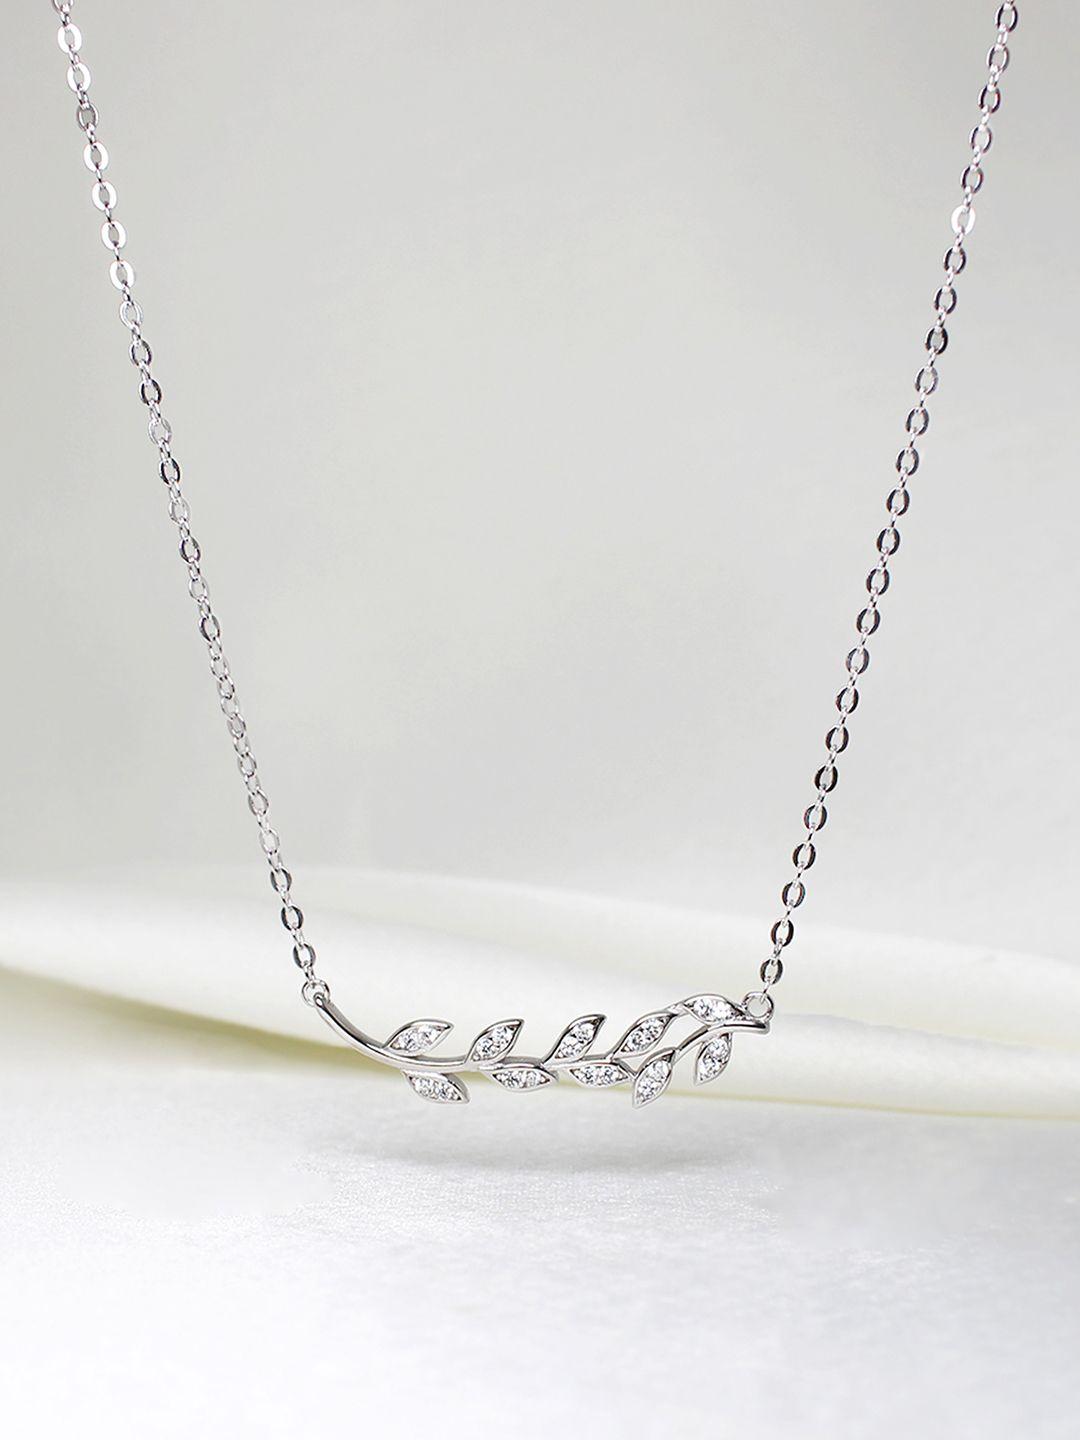 giva 925 sterling silver rhodium plated leaf necklace